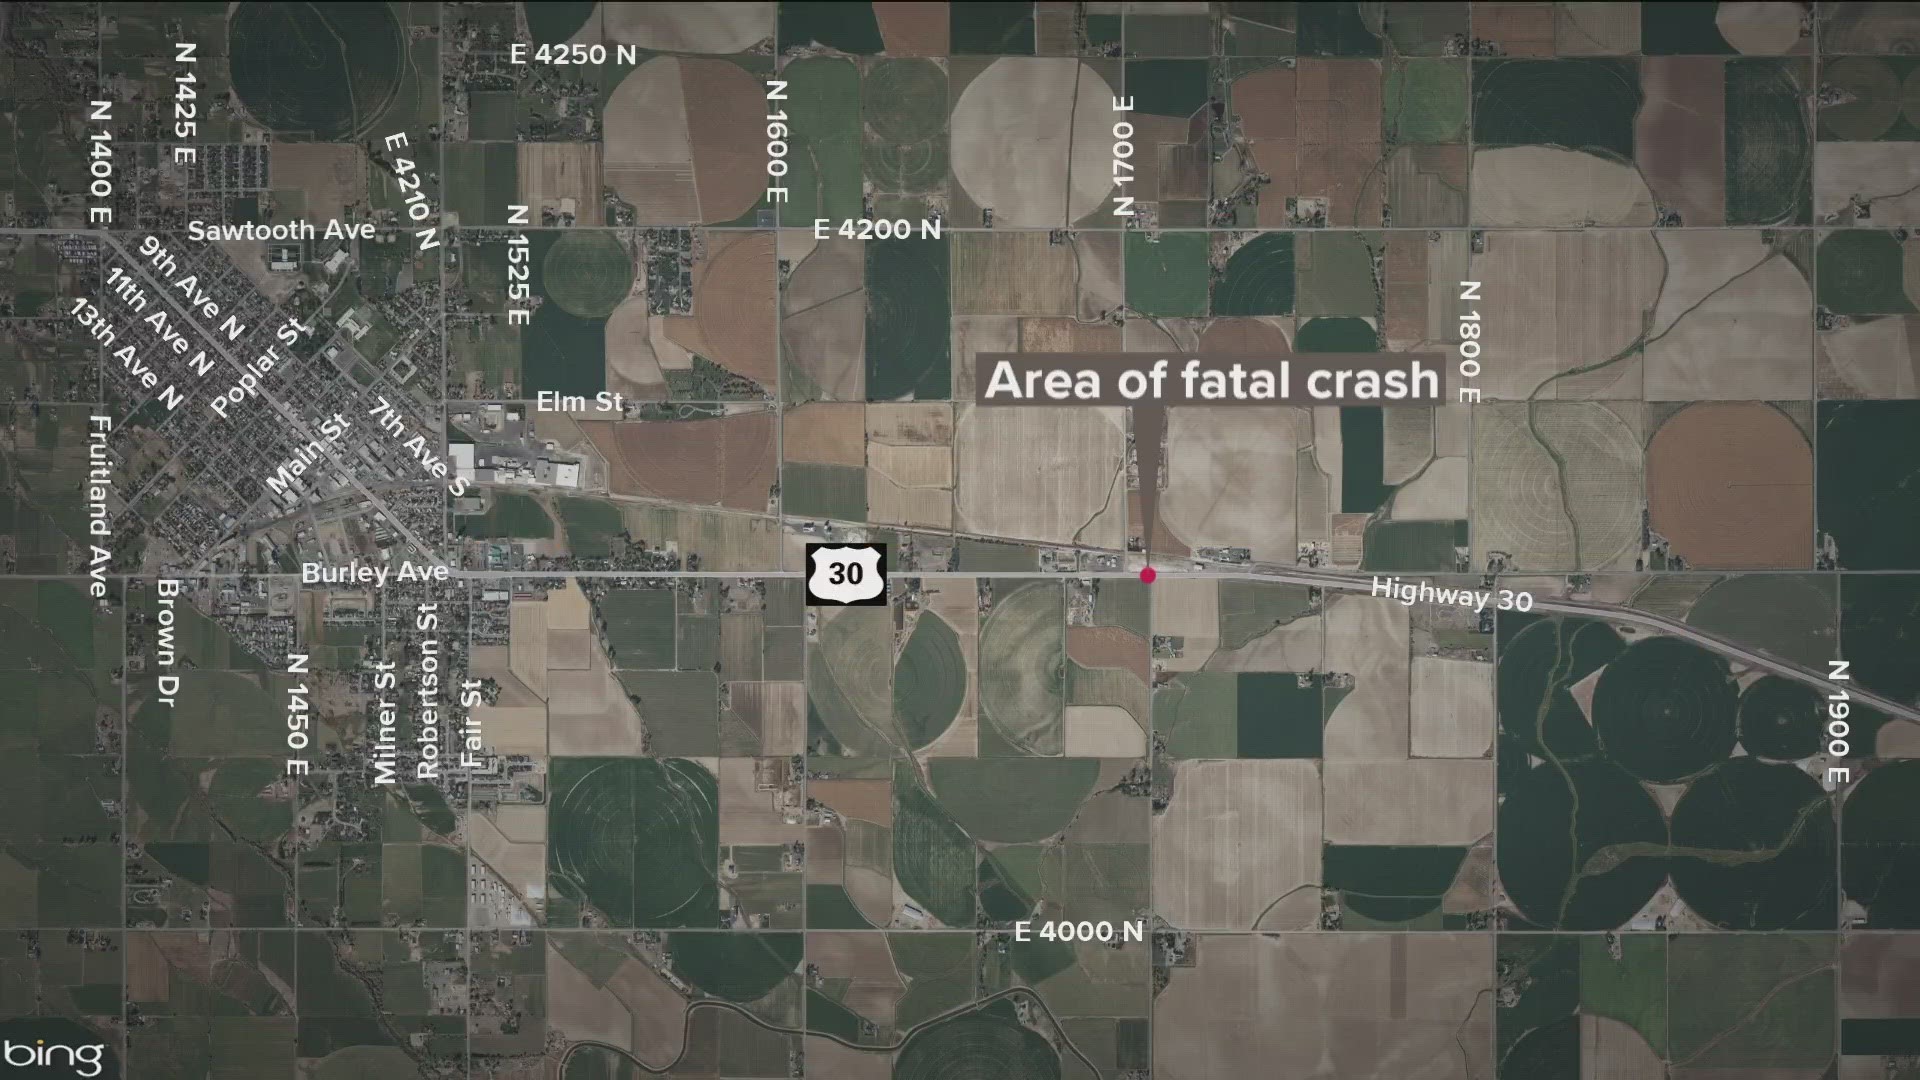 A 27-year-old from Buhl was killed Wednesday morning in a crash with a semi-truck hauling straw bales on US-30, according to Idaho State Police.